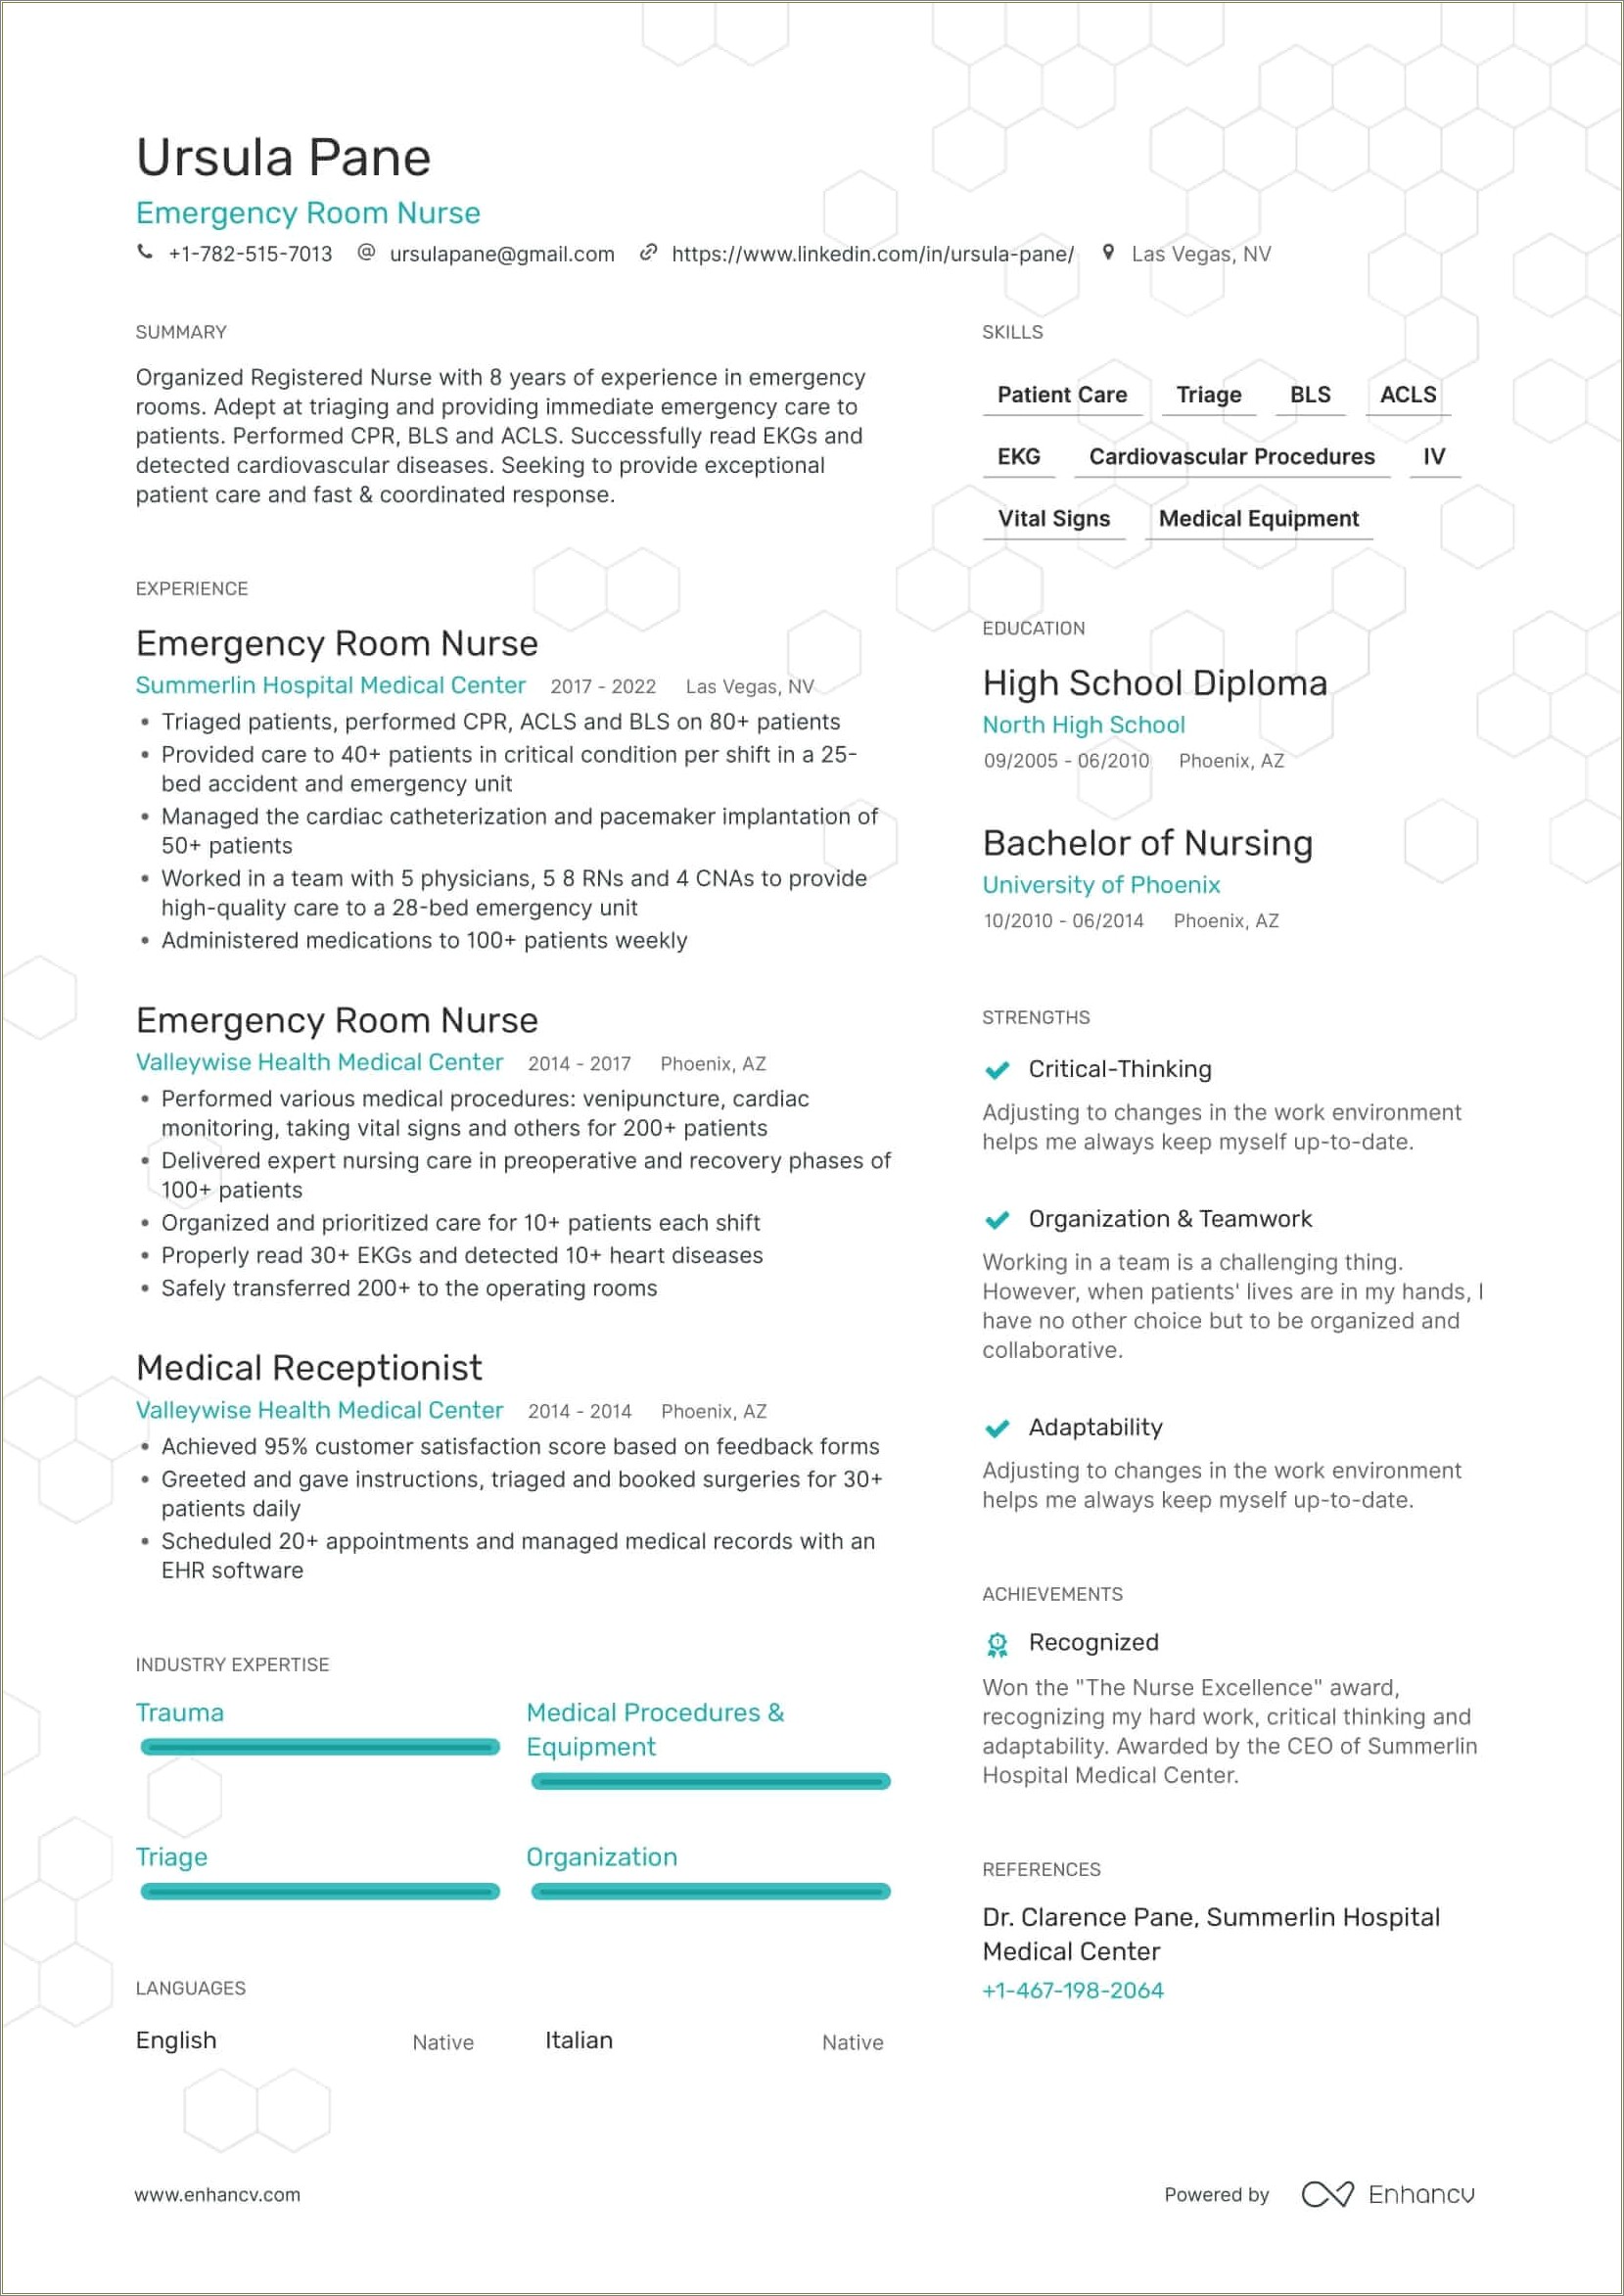 Nursing Job Related Training Examples For Resume Pacu